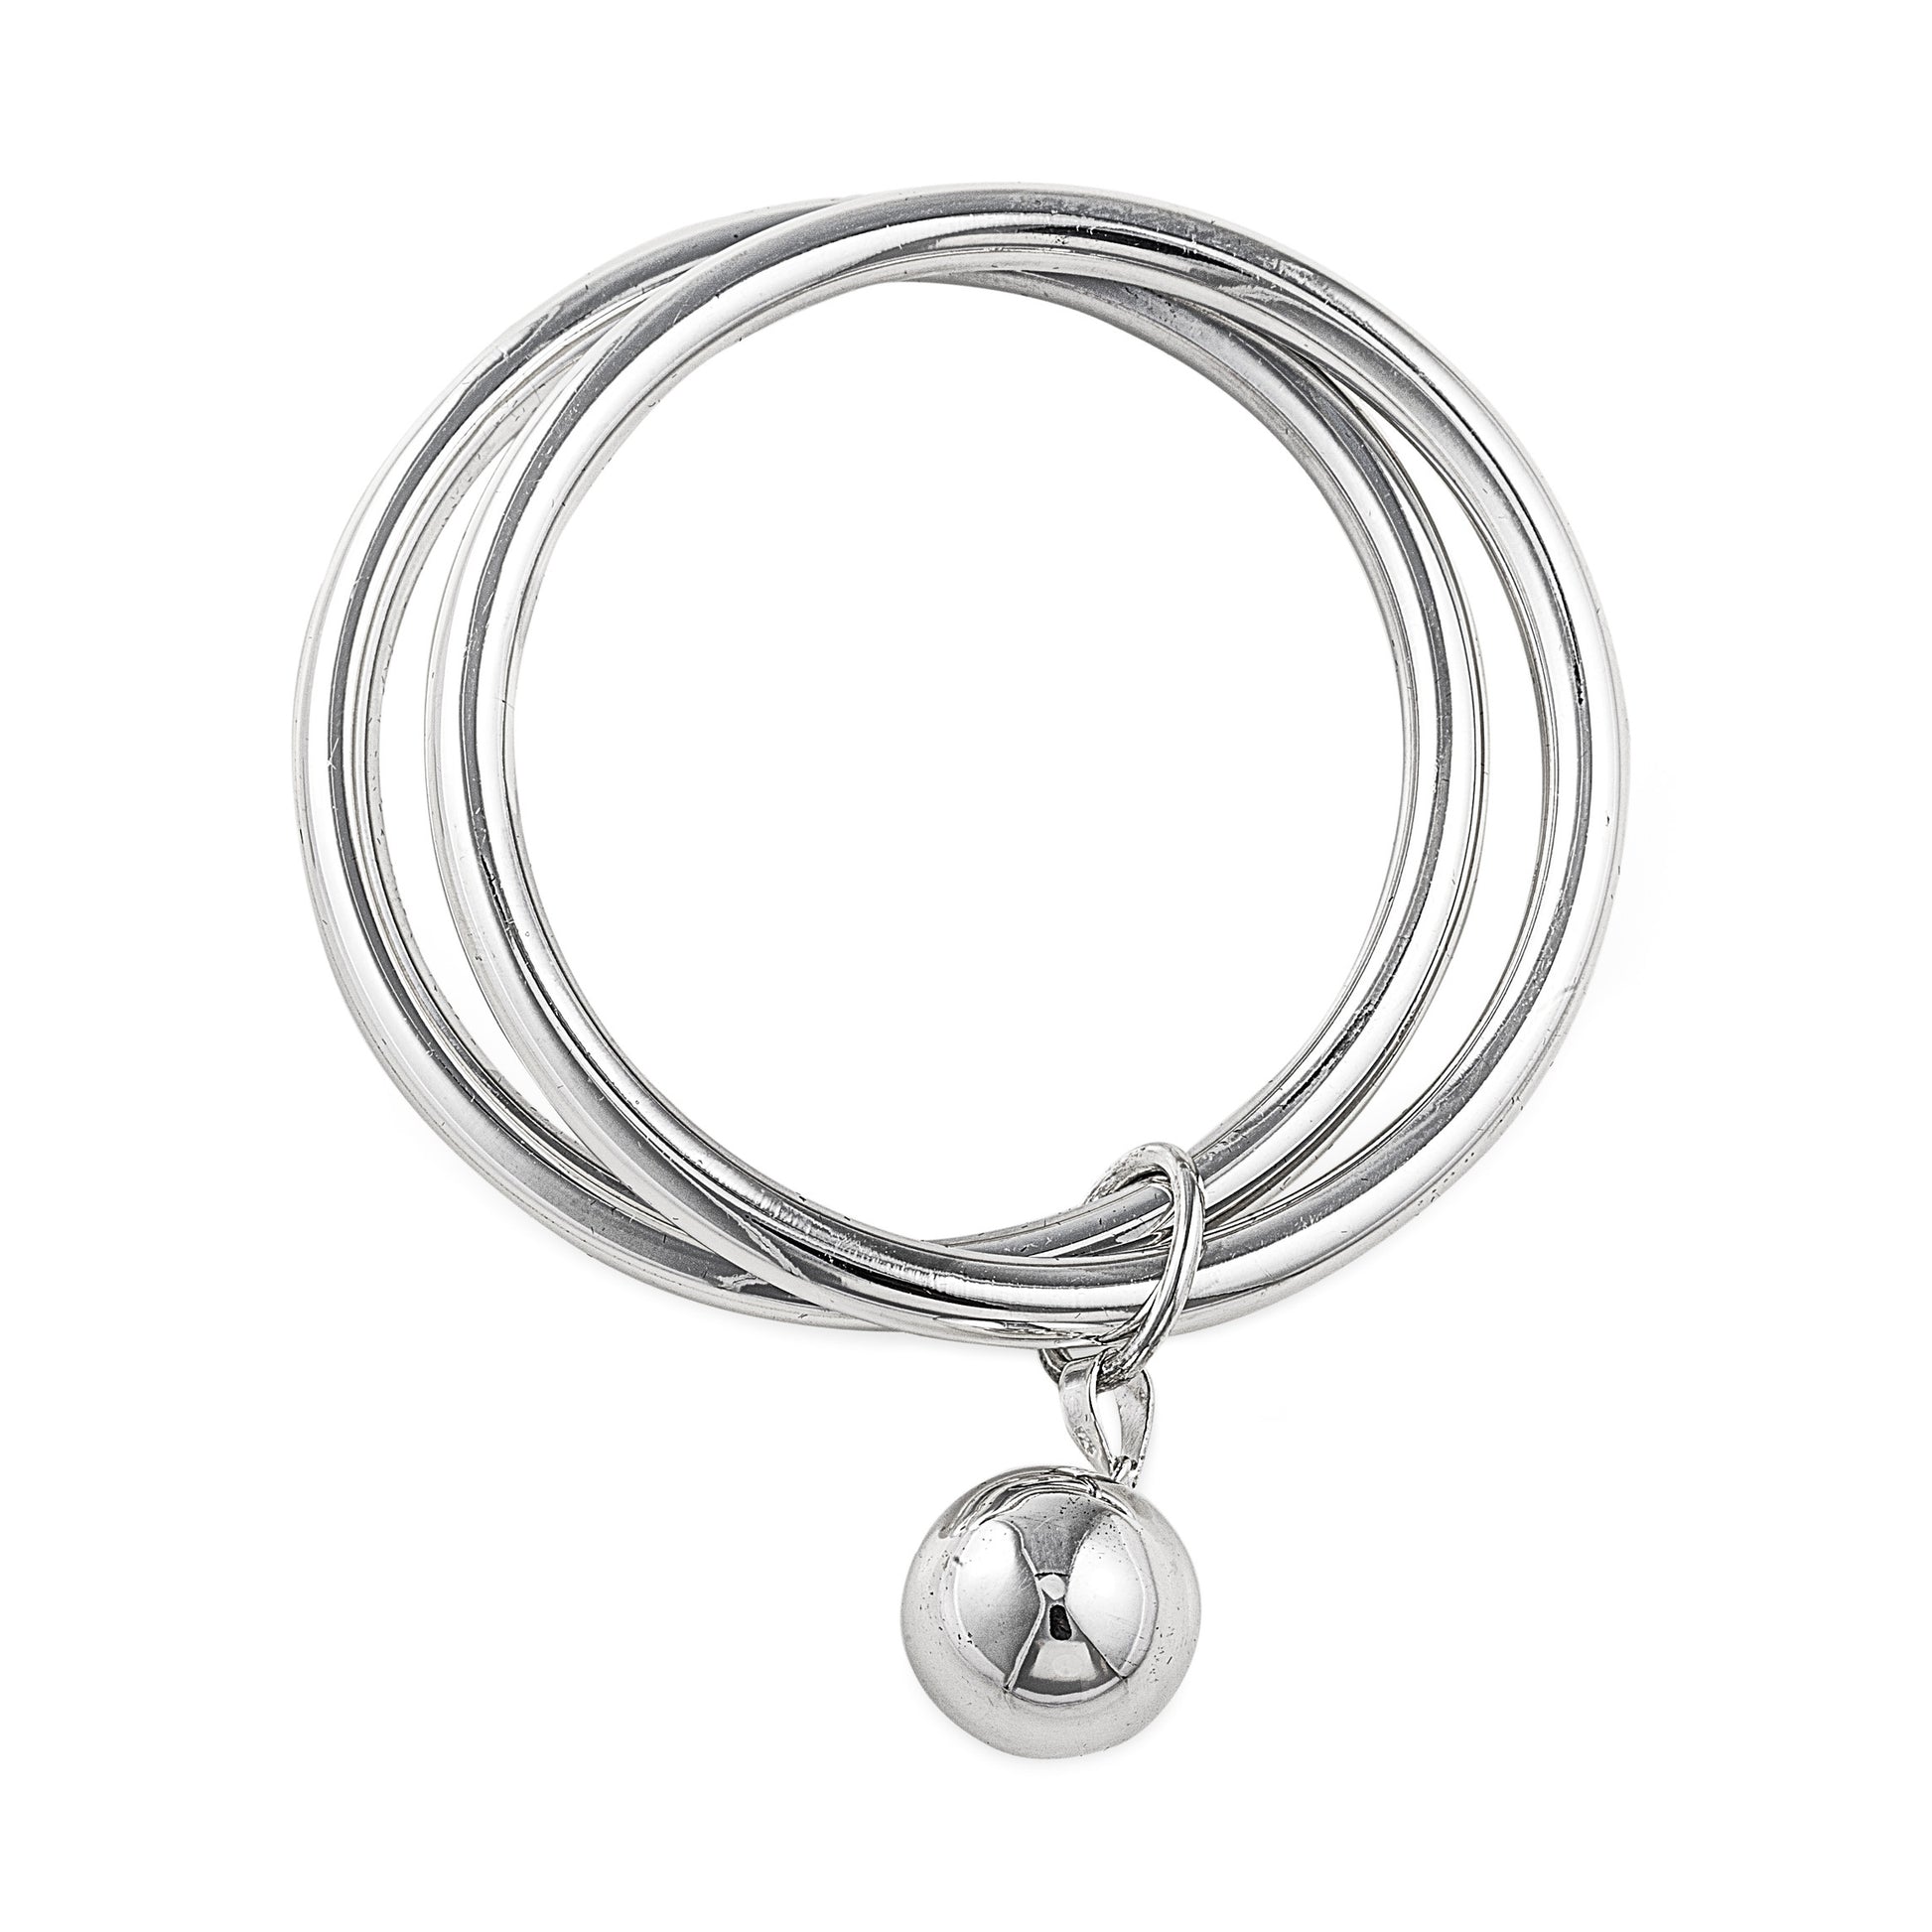 Luna Eclipse Bangle in 925 Sterling Silver & Large Silver Ball Charm. Made up of 2 separate bangles connected by a silver loop. Worldwide shipping. Affordable luxury jewellery by Bellagio & Co.